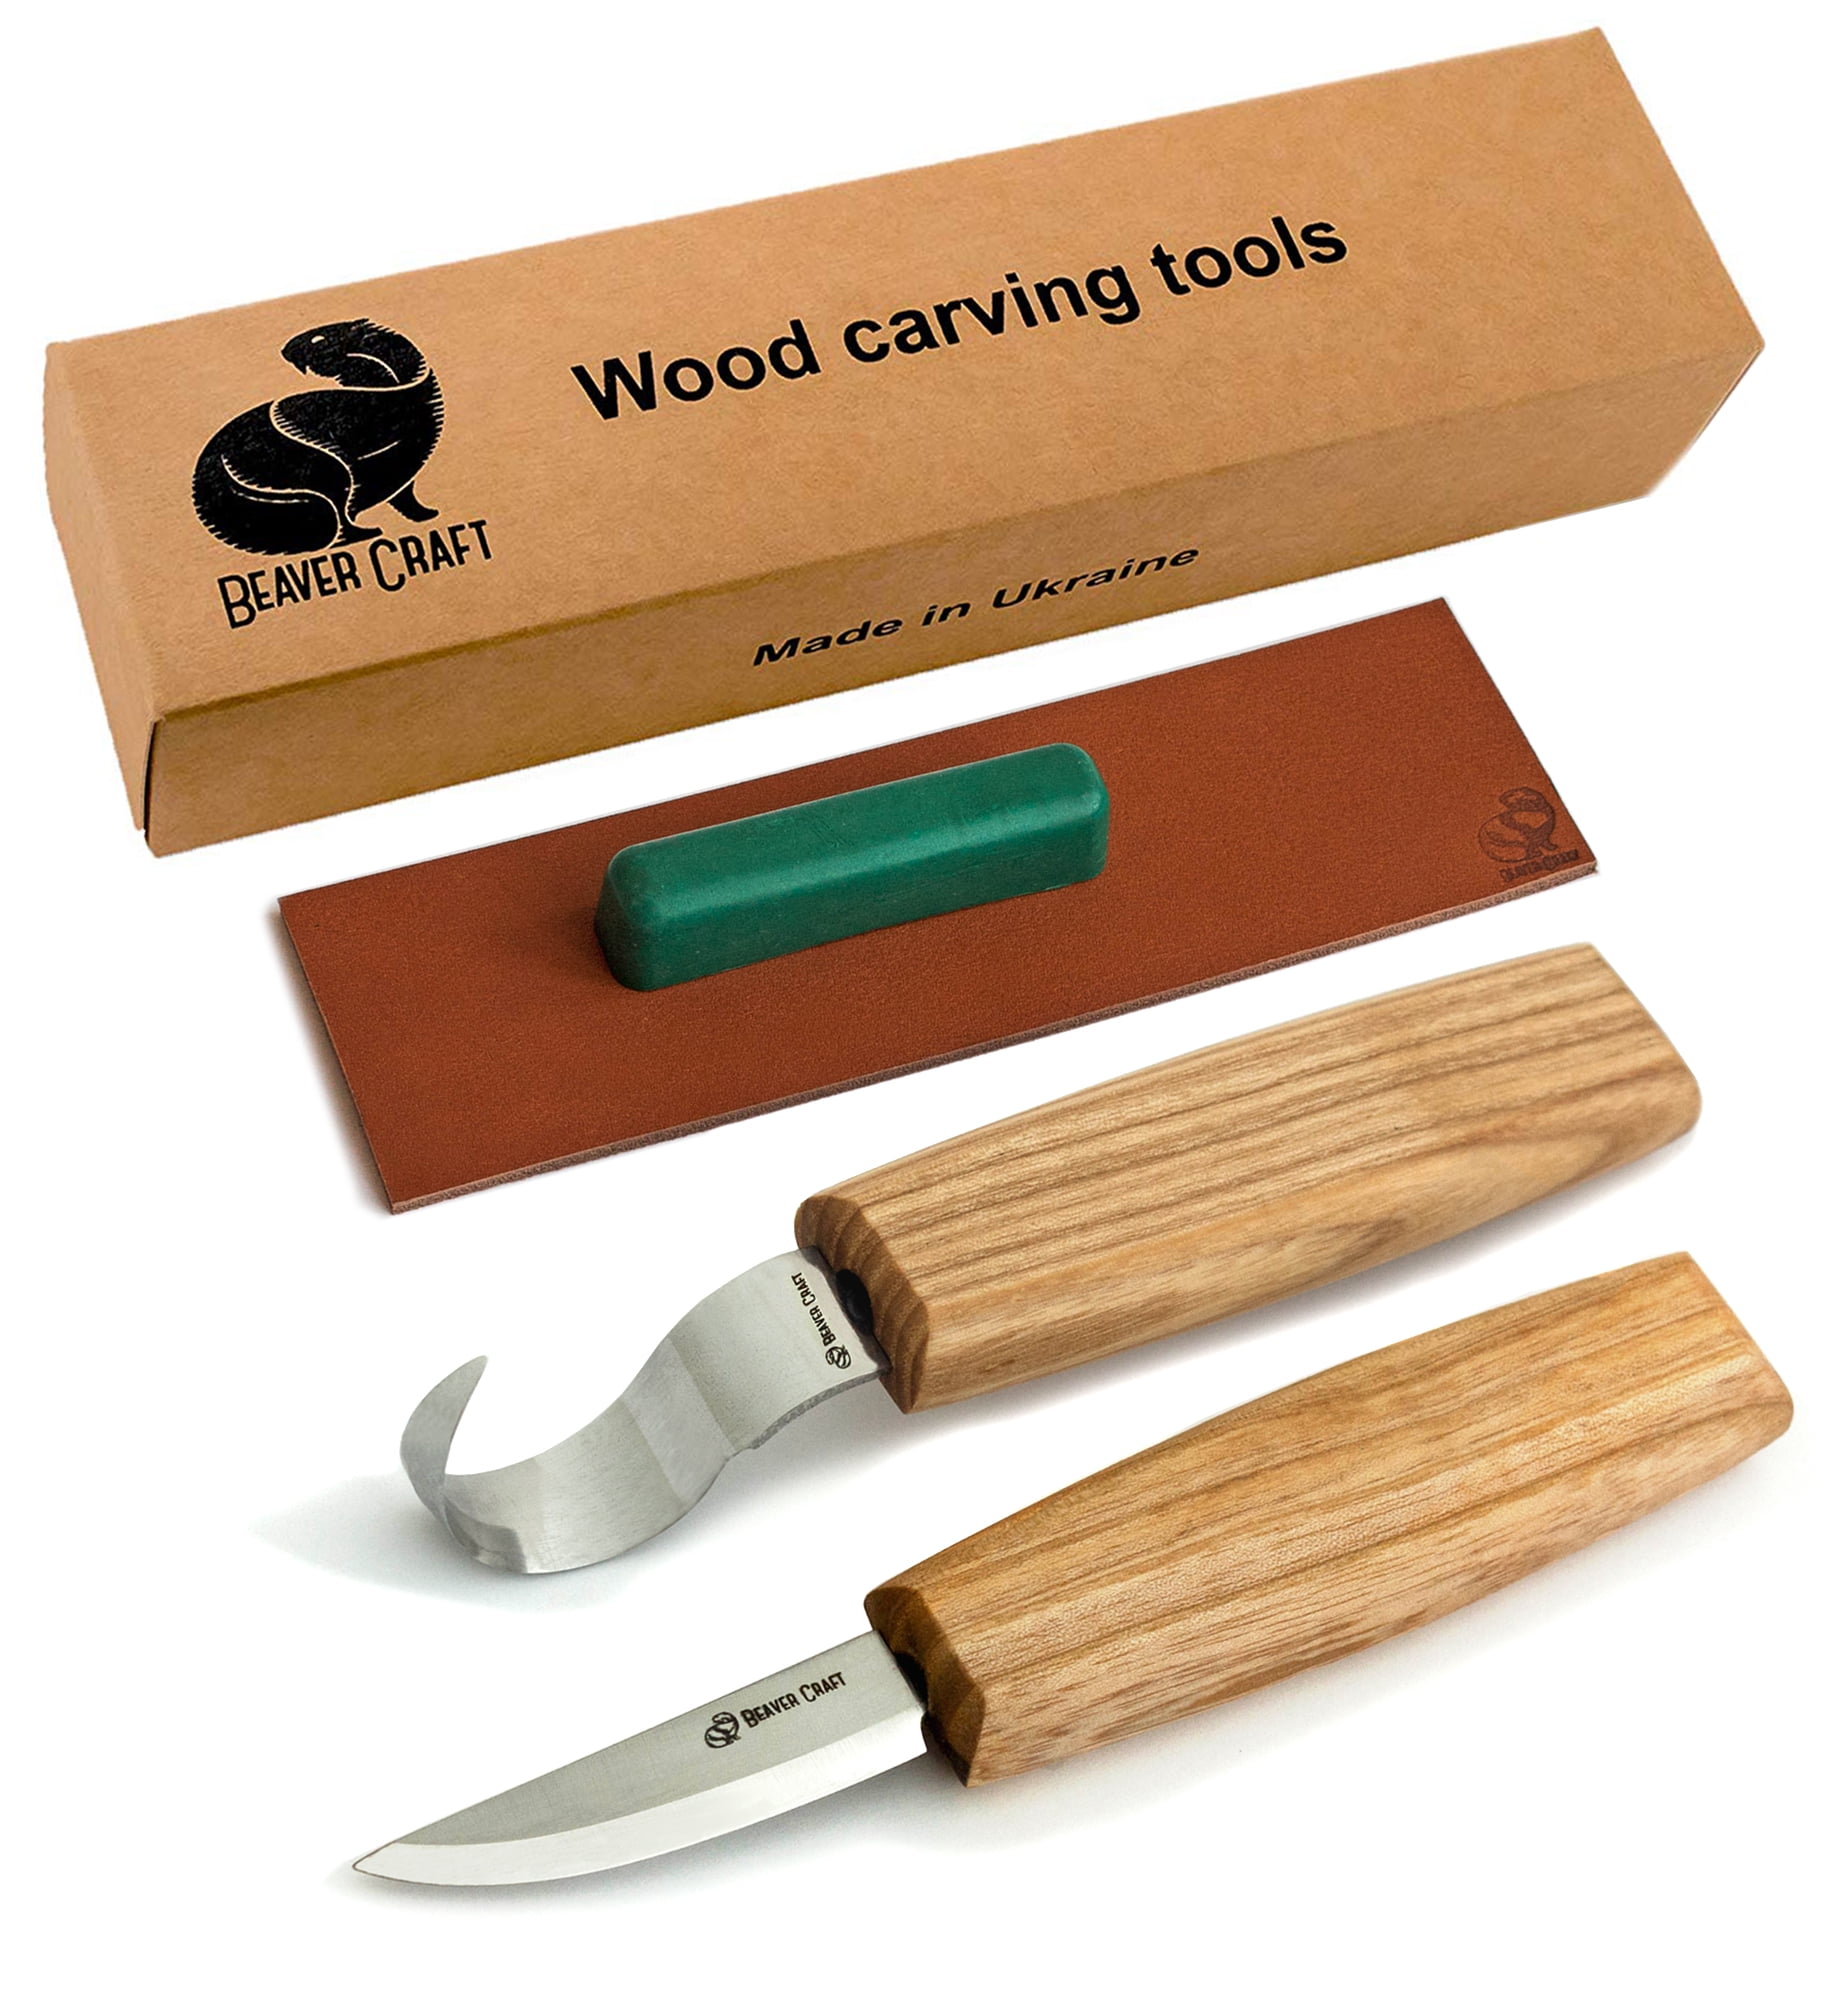 BeaverCraft, Wood Whittling Kit for Beginners DIY04 - Spoon Carving Kit - Wood Carving Whittling Hobby Kit for Adults and Teens - Wood Carving Hook